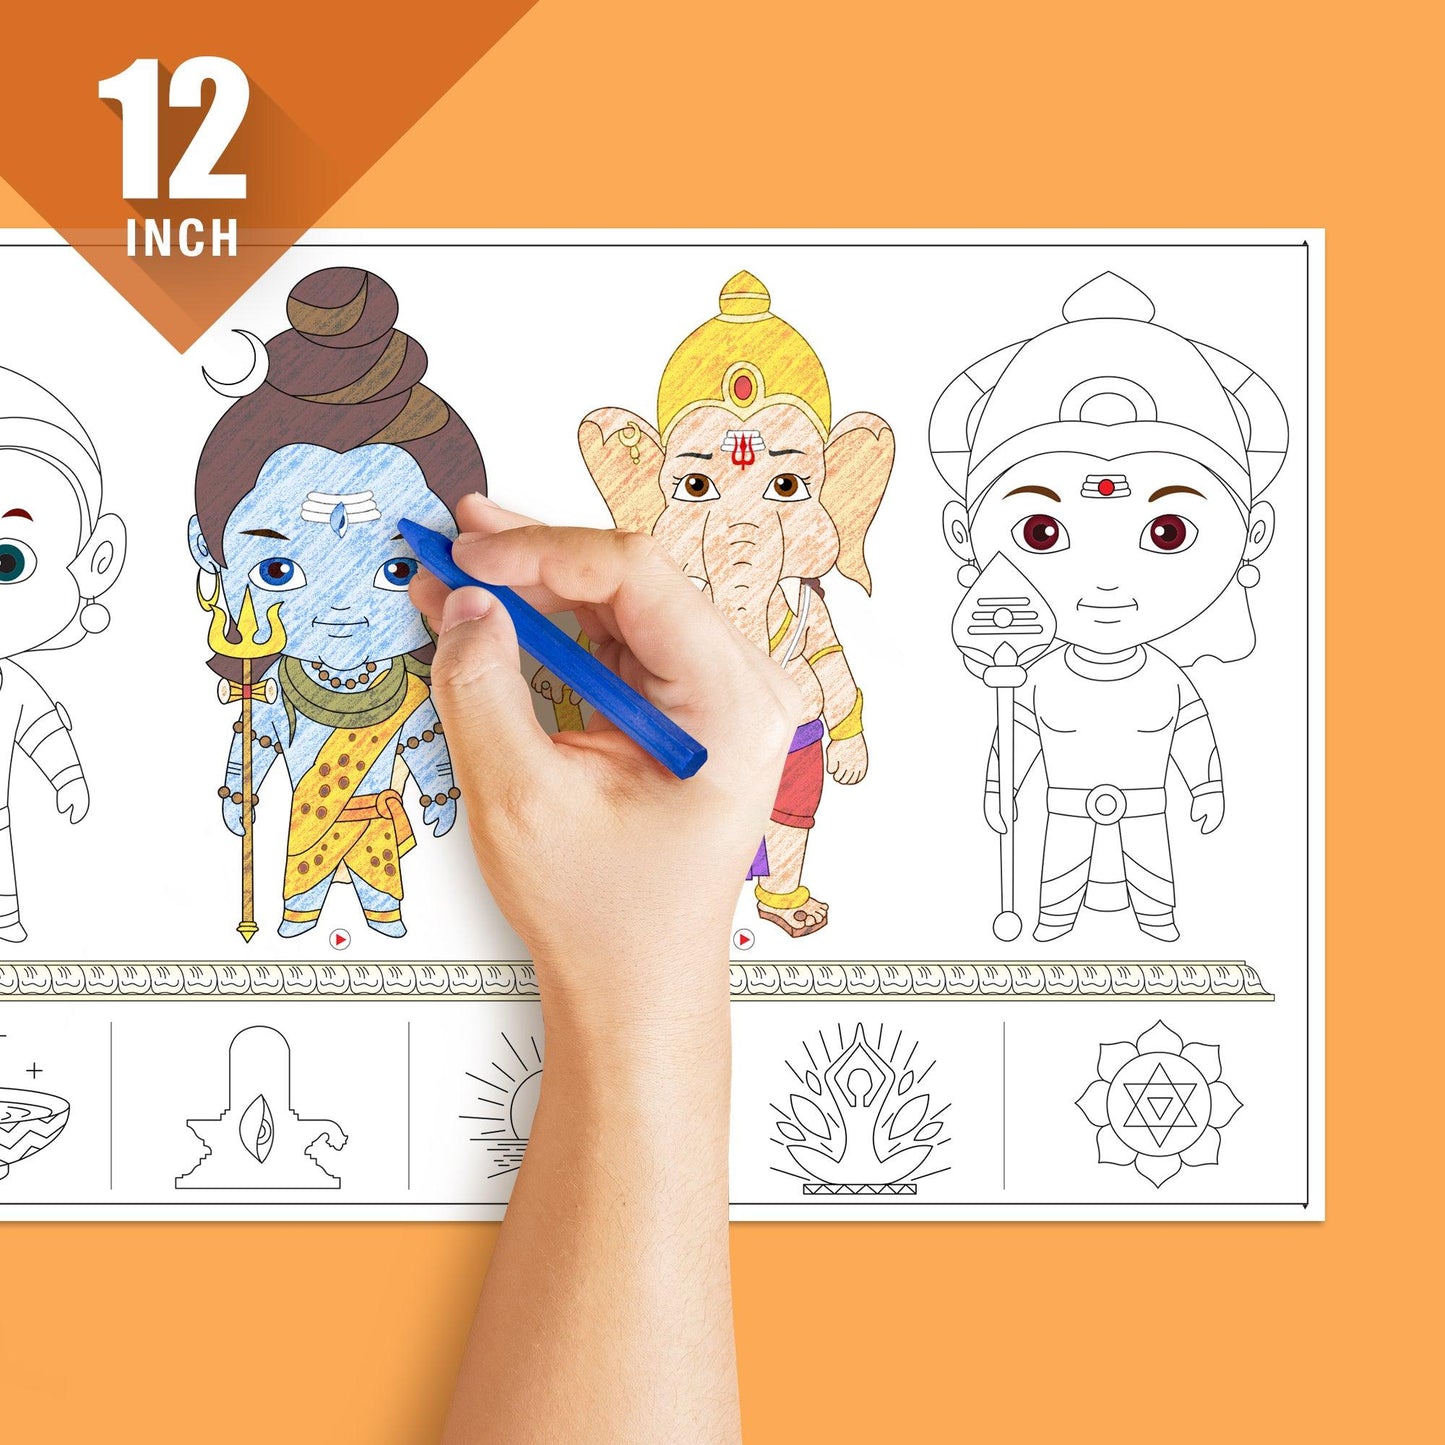 The image depicts a hand colouring a book with sketch